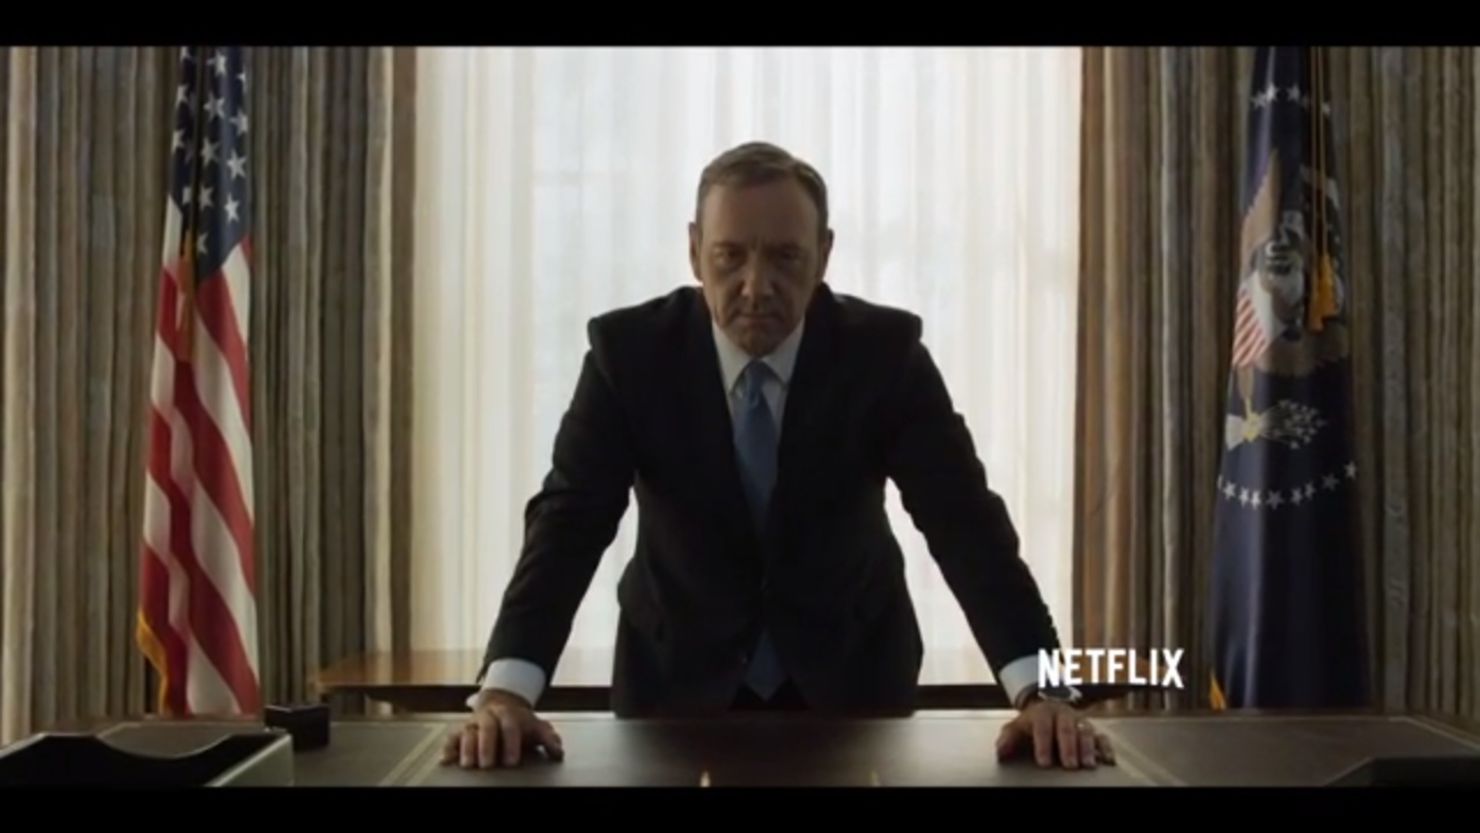 Kevin Spacey as ruthless congressman-turned-President Frank Underwood in "House of Cards."